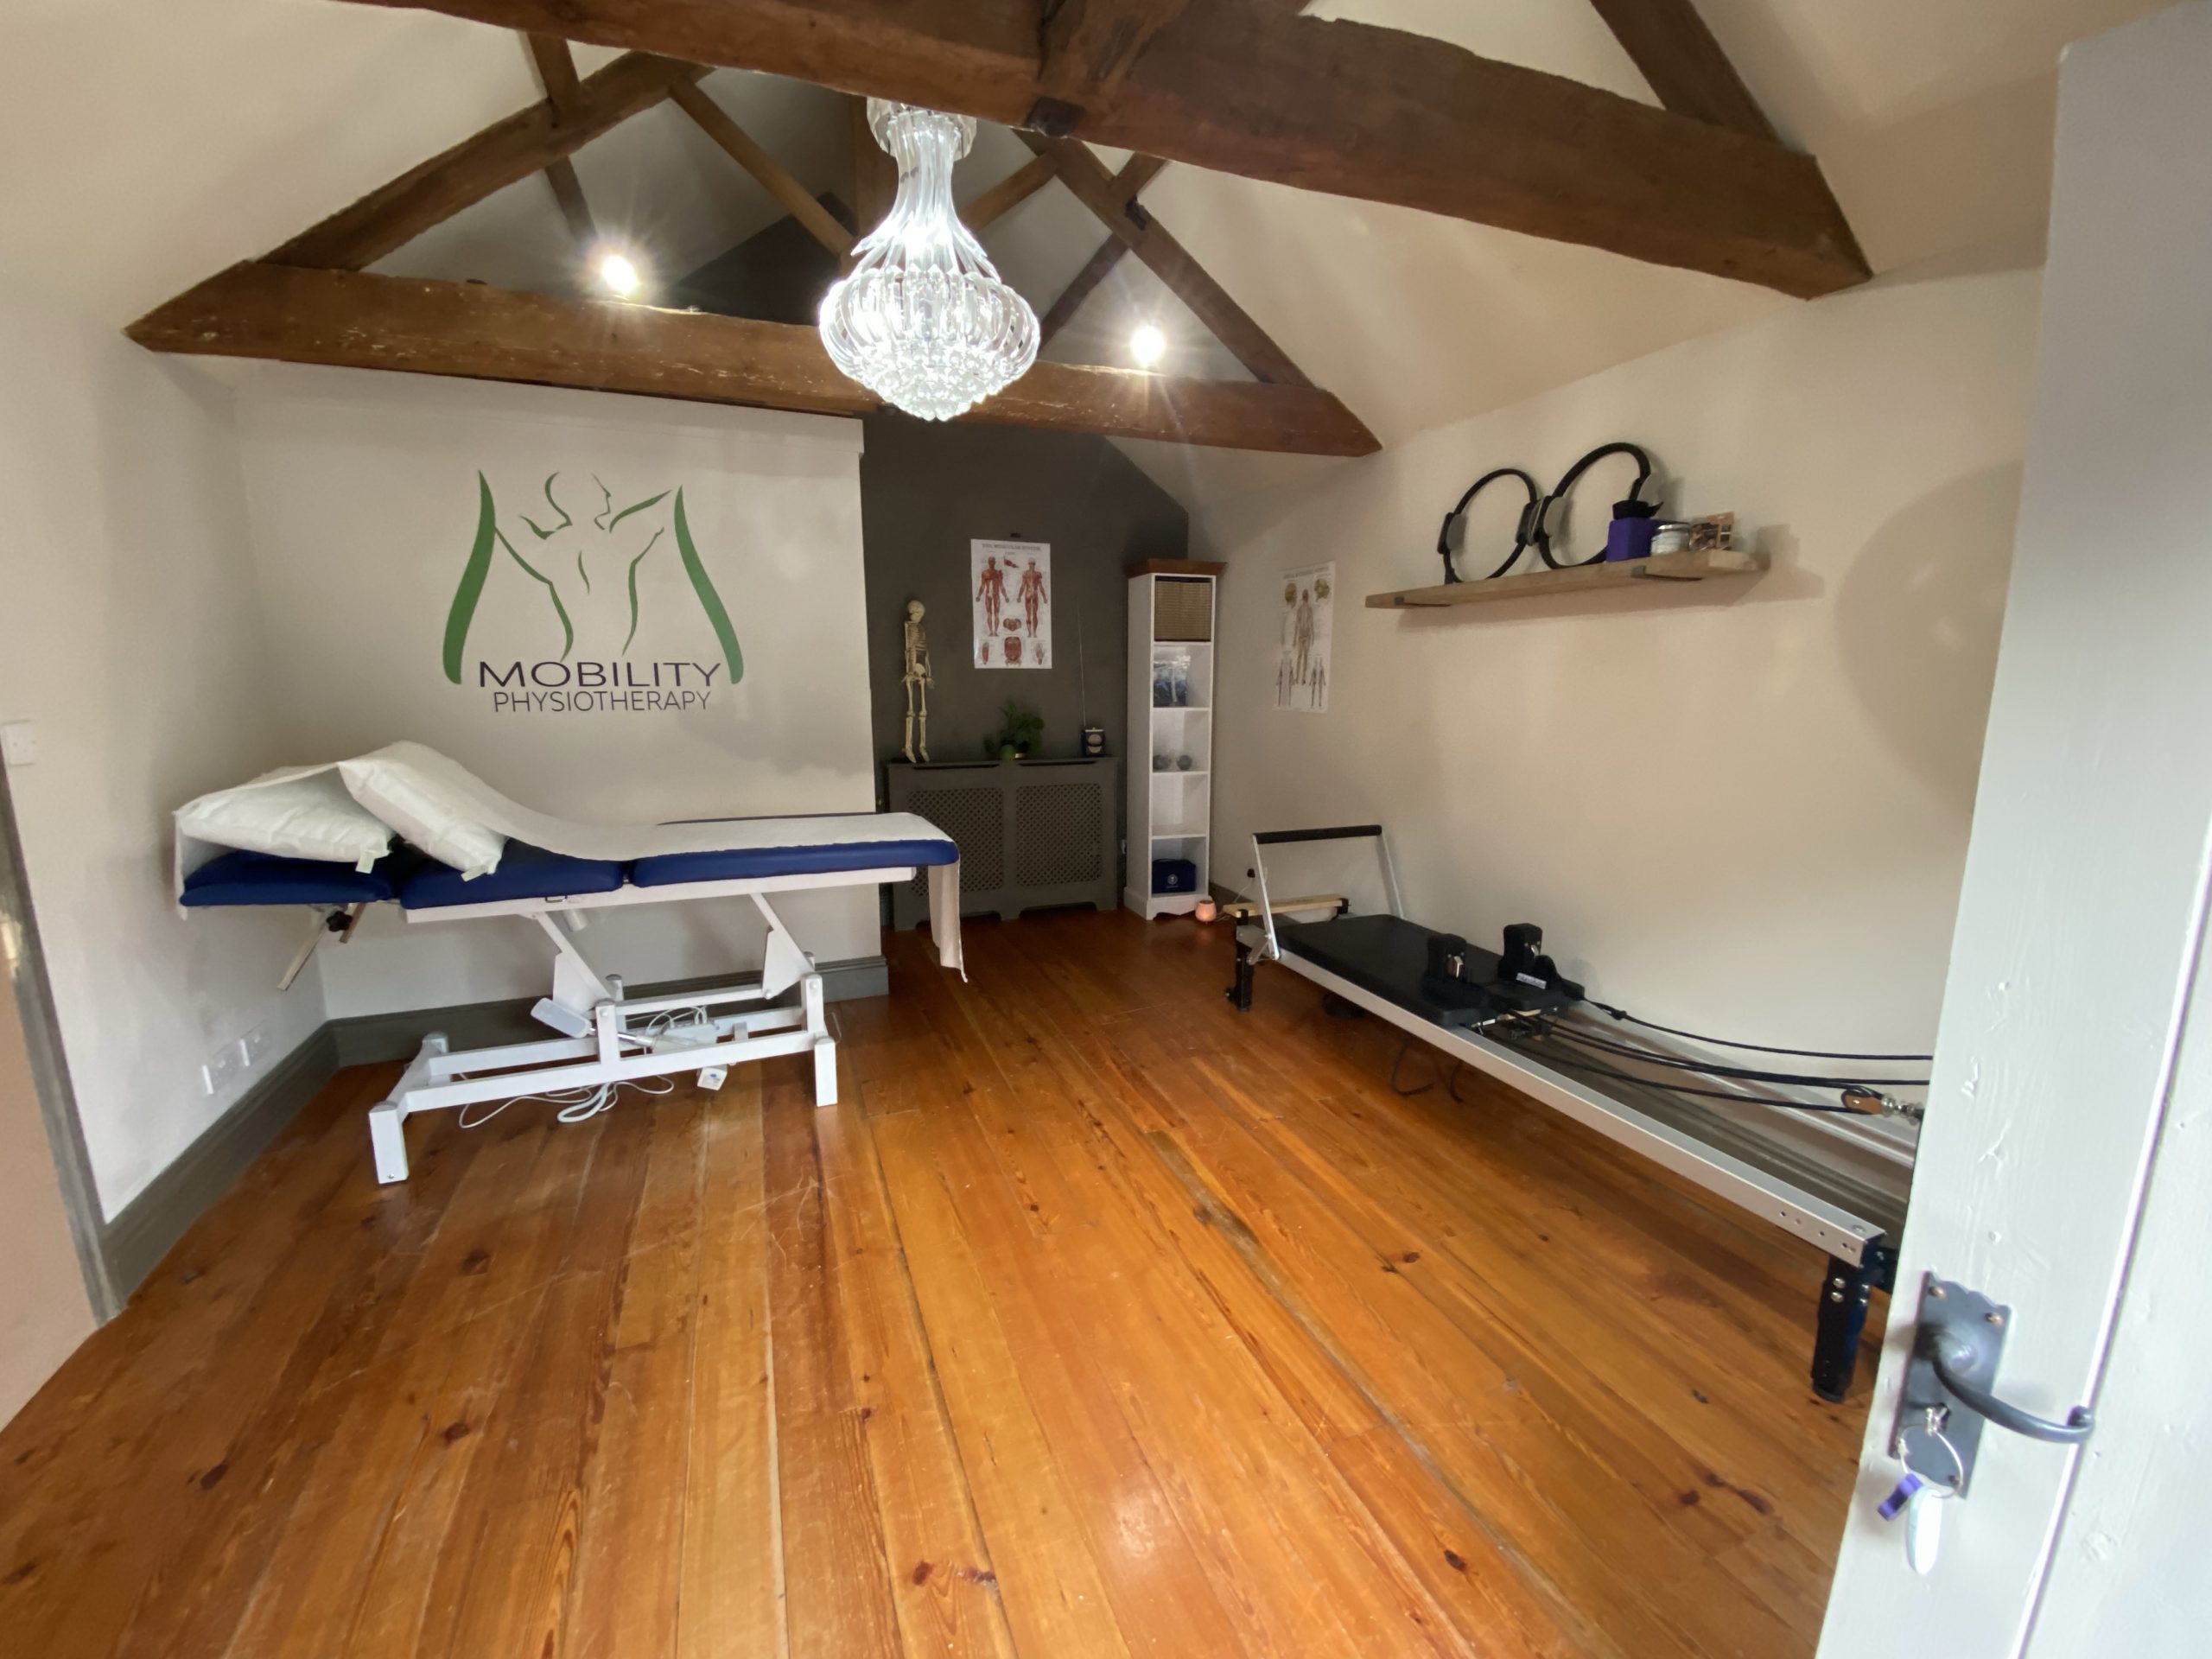 Read more about the article Mobility physiotherapy & Pilates studio open from 7th September